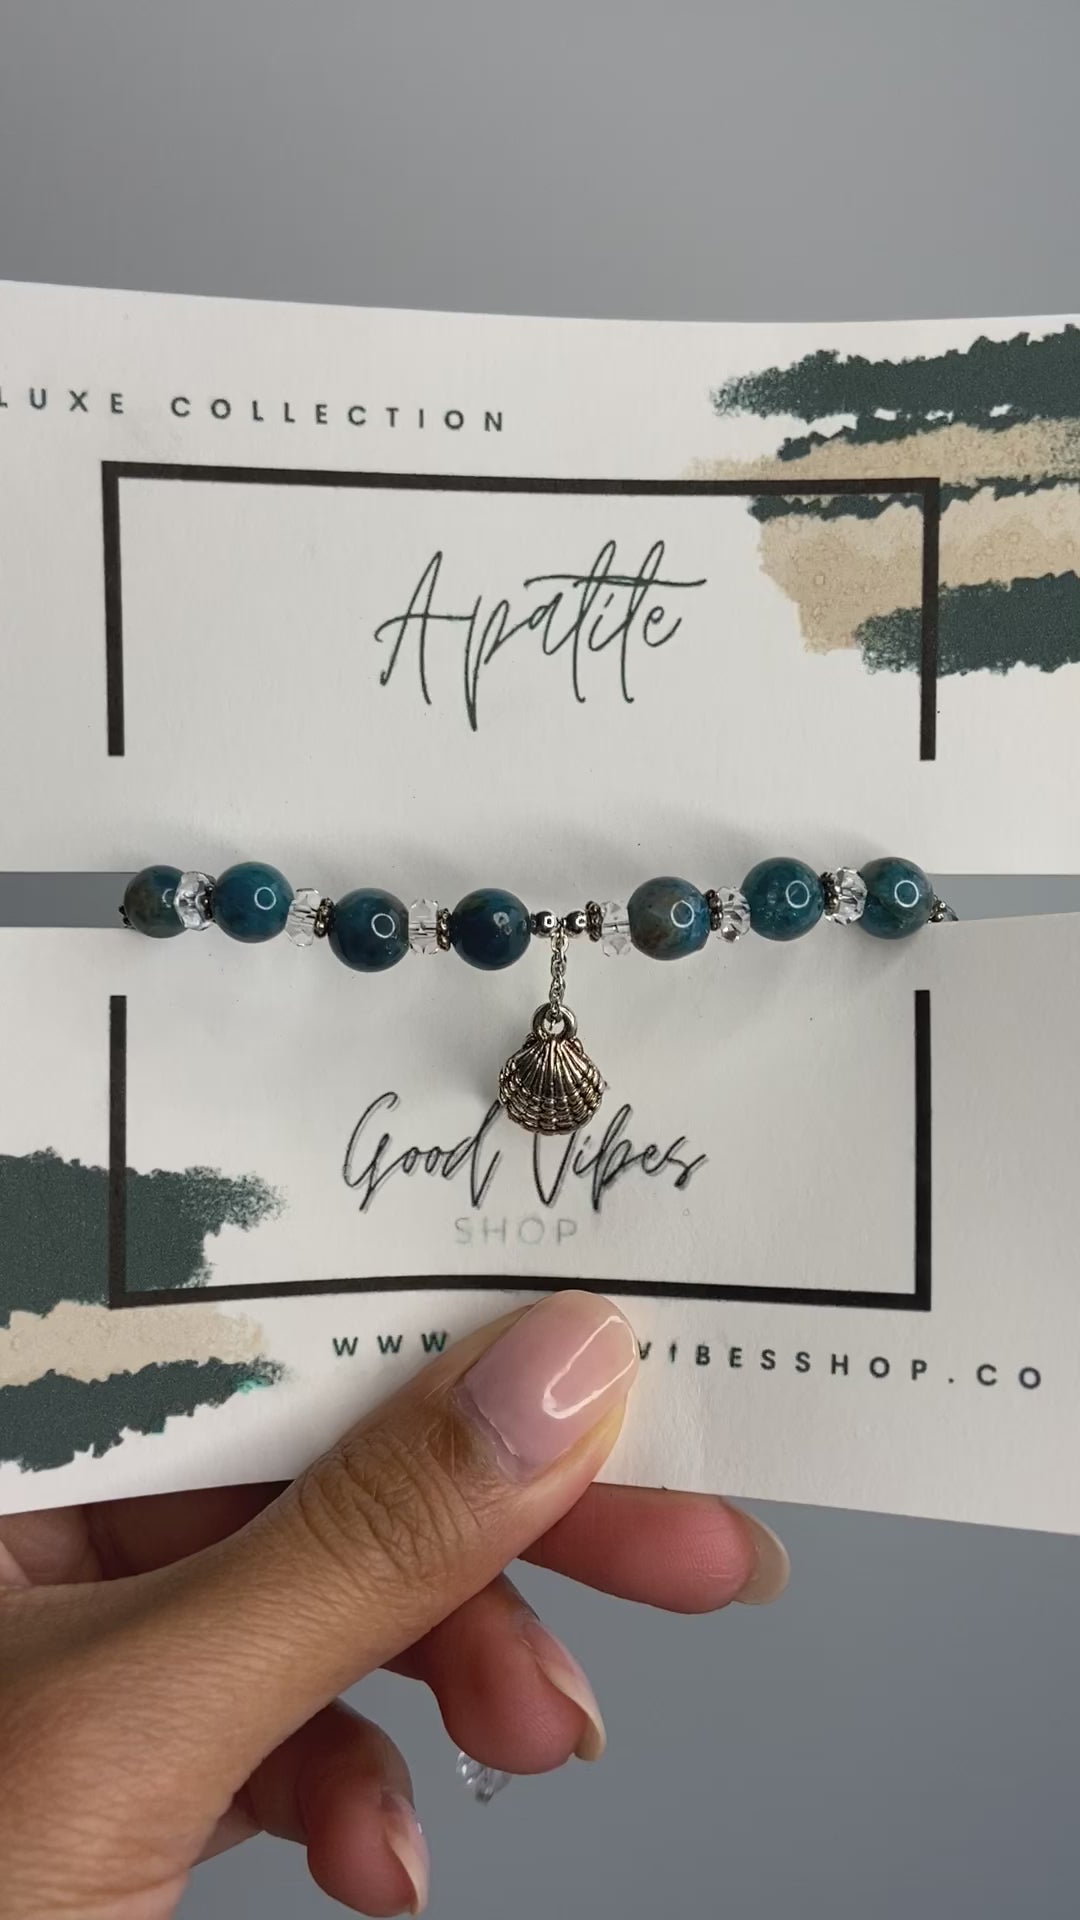 LUXE Collection - Apatite